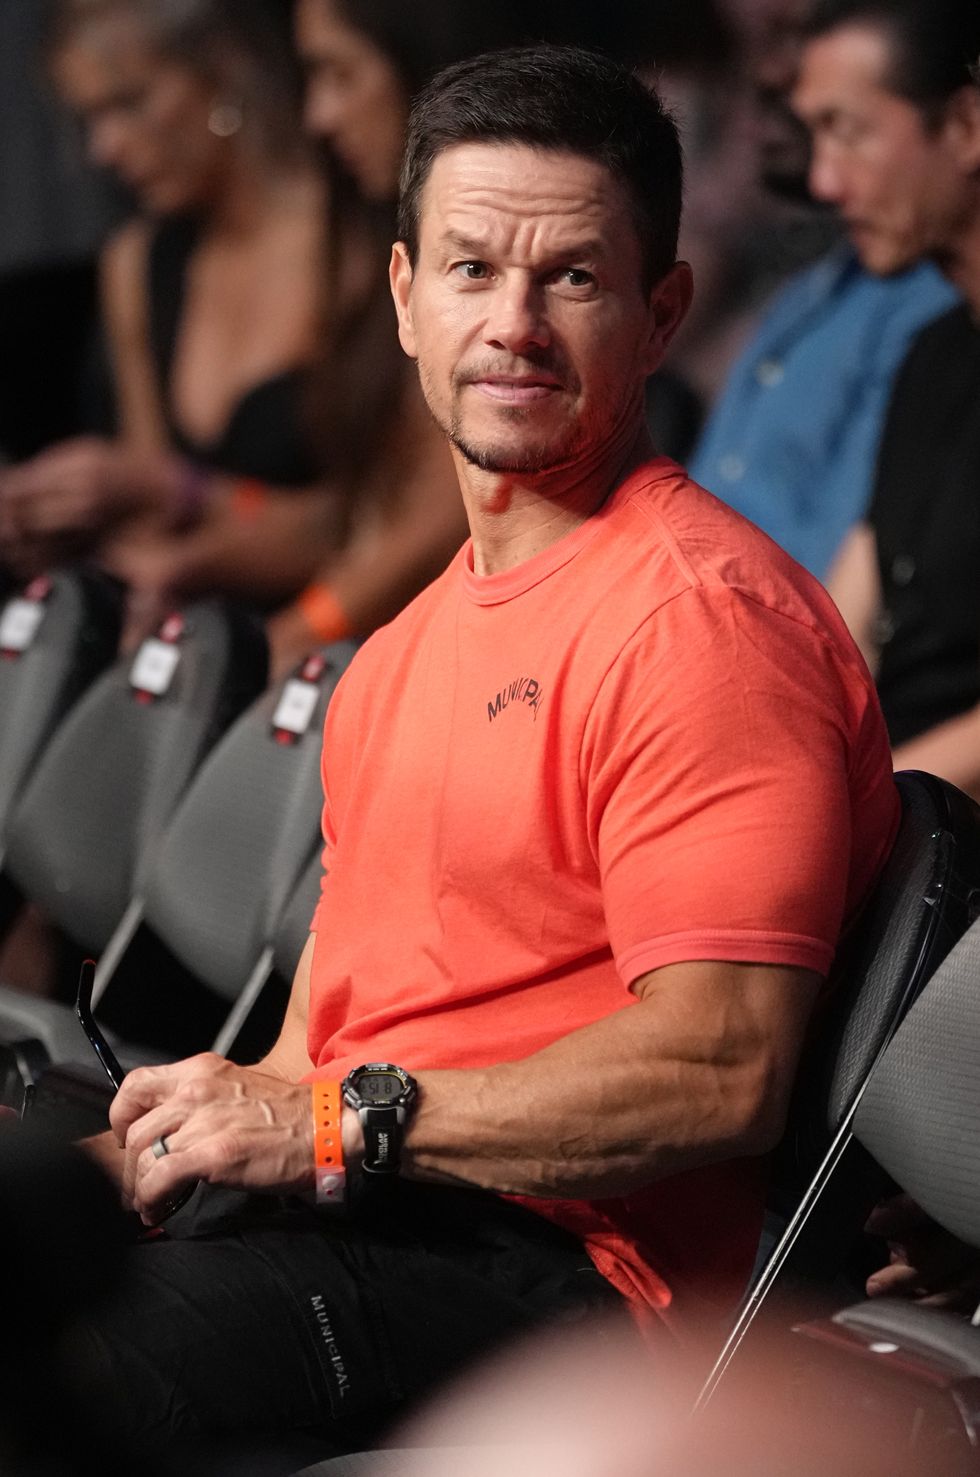 las vegas, nevada september 10 actor mark wahlberg is seen in attendance during the ufc 279 event at t mobile arena on september 10, 2022 in las vegas, nevada photo by jeff bottarizuffa llc